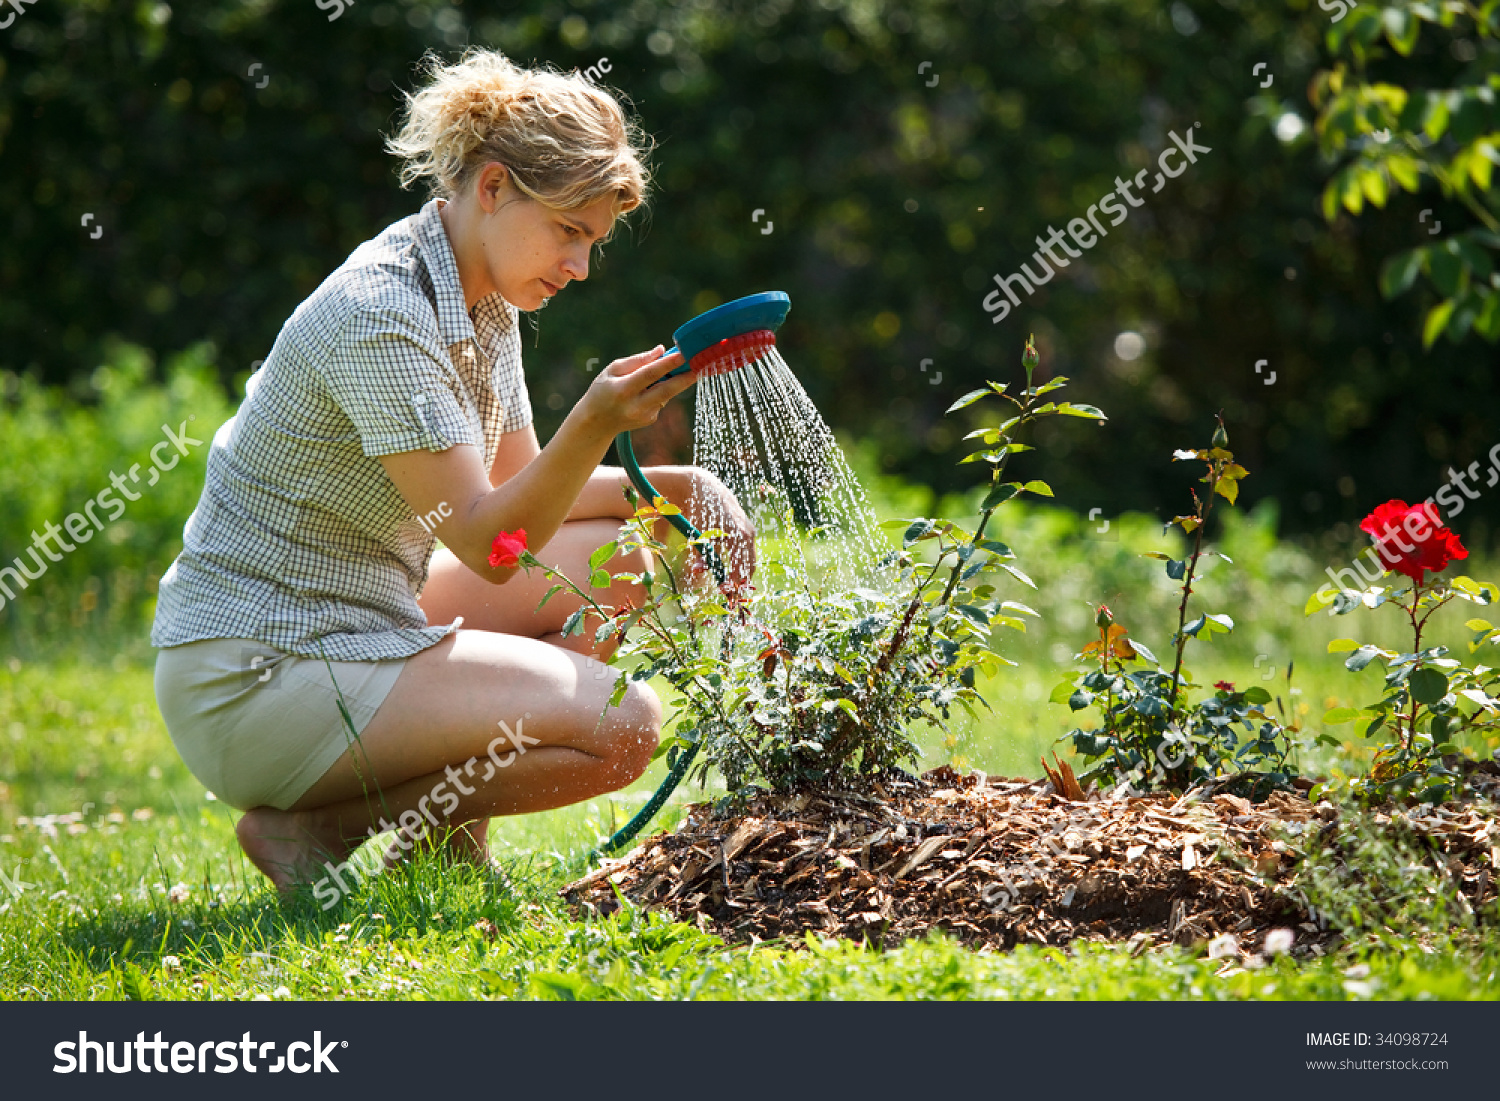 Woman watering rose plant with watering pot #34098724